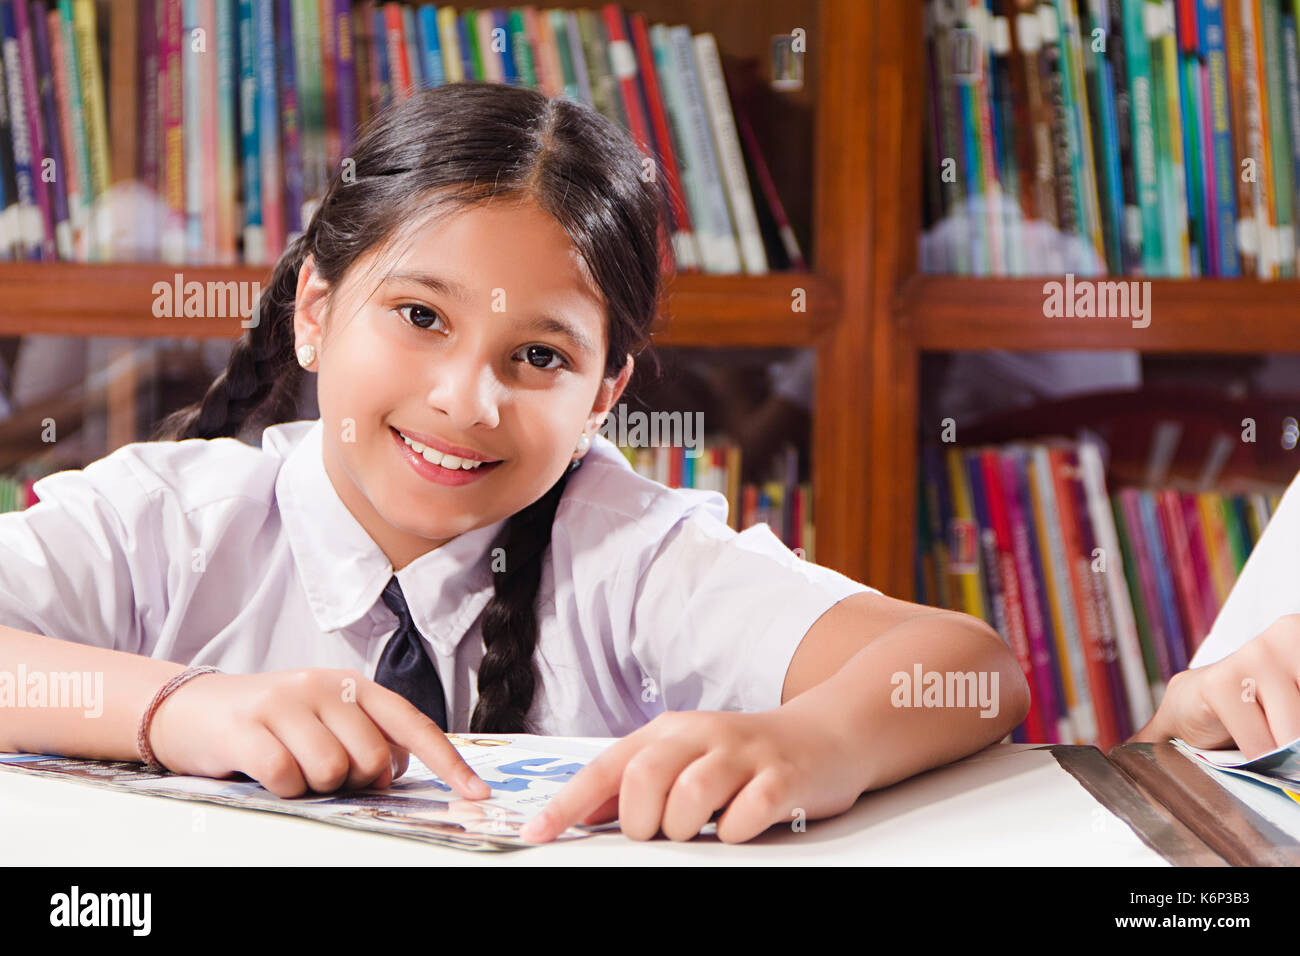 1 Indian School Girl Student Reading Book Study Education In Library Stock Photo